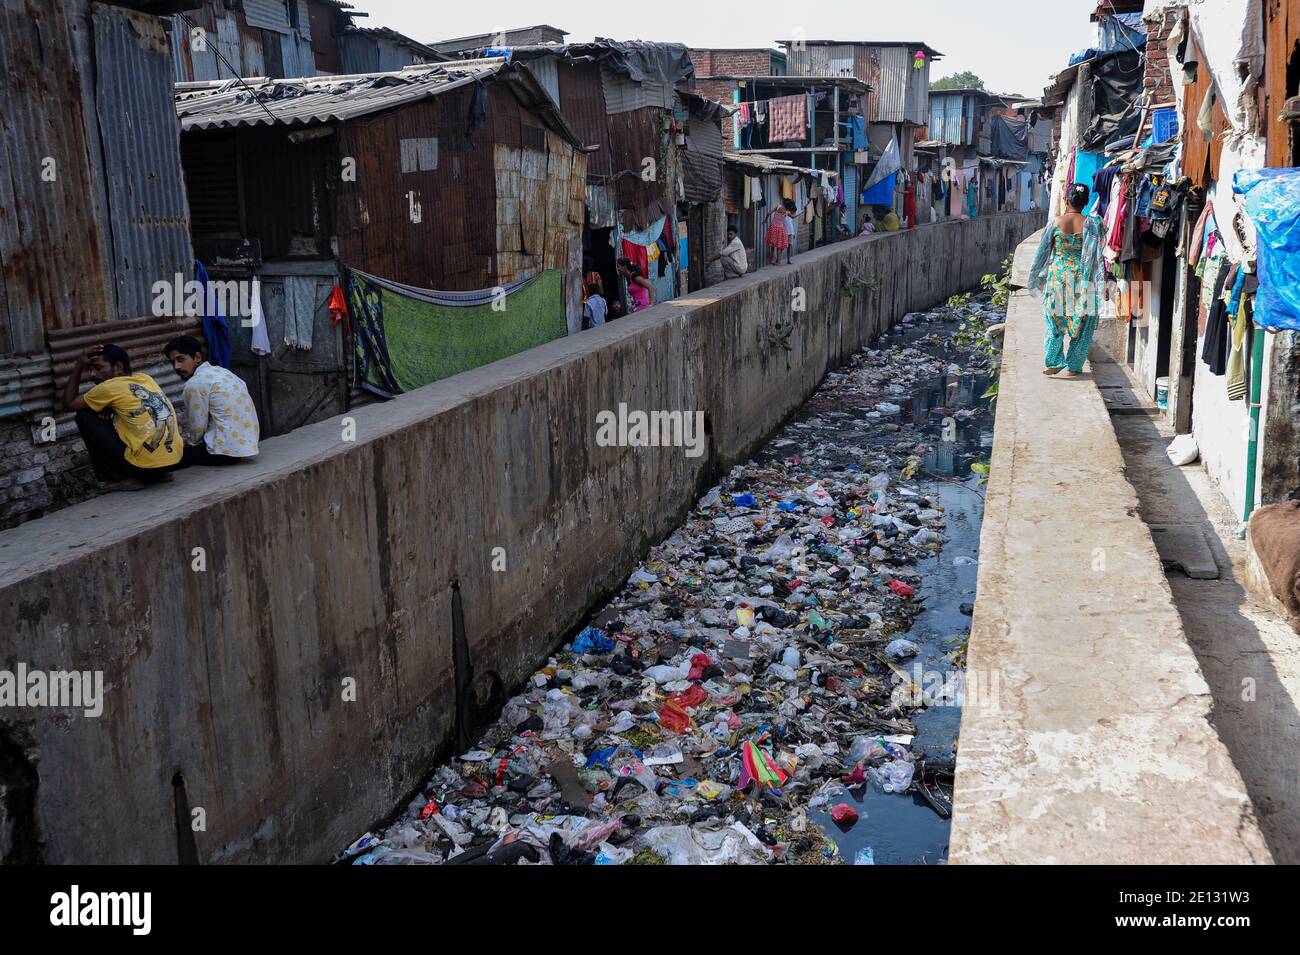 07.12.2011, Mumbai, Maharashtra, India, Asia - Dirty river covered with domestic waste and litter surrounded by buildings and shacks at Dharavi slum. Stock Photo